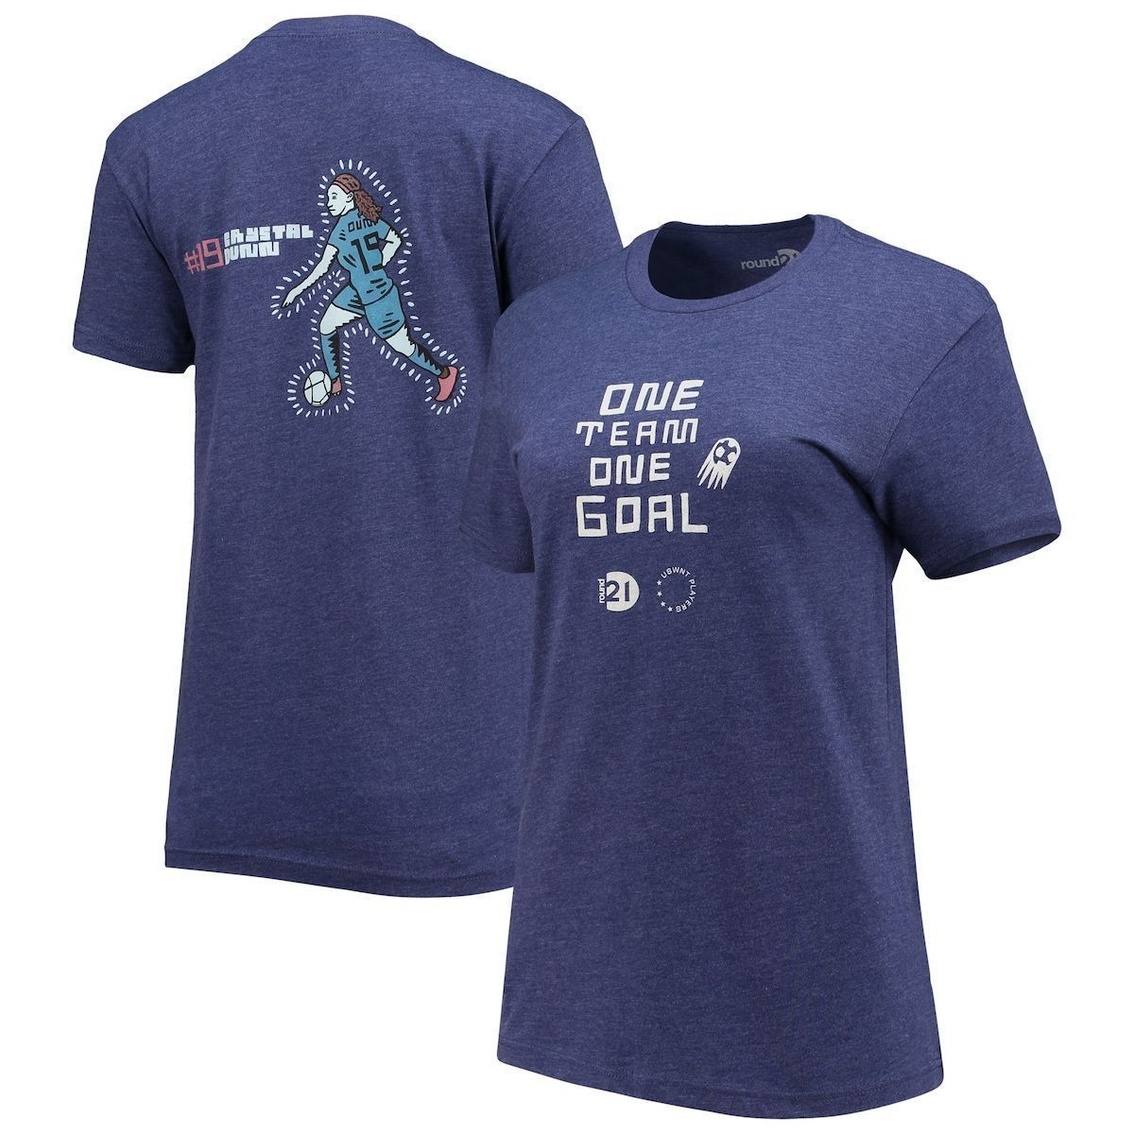 round21 Women's round21 Crystal Dunn Navy USWNT One Team One Goal T-Shirt - Image 1 of 4